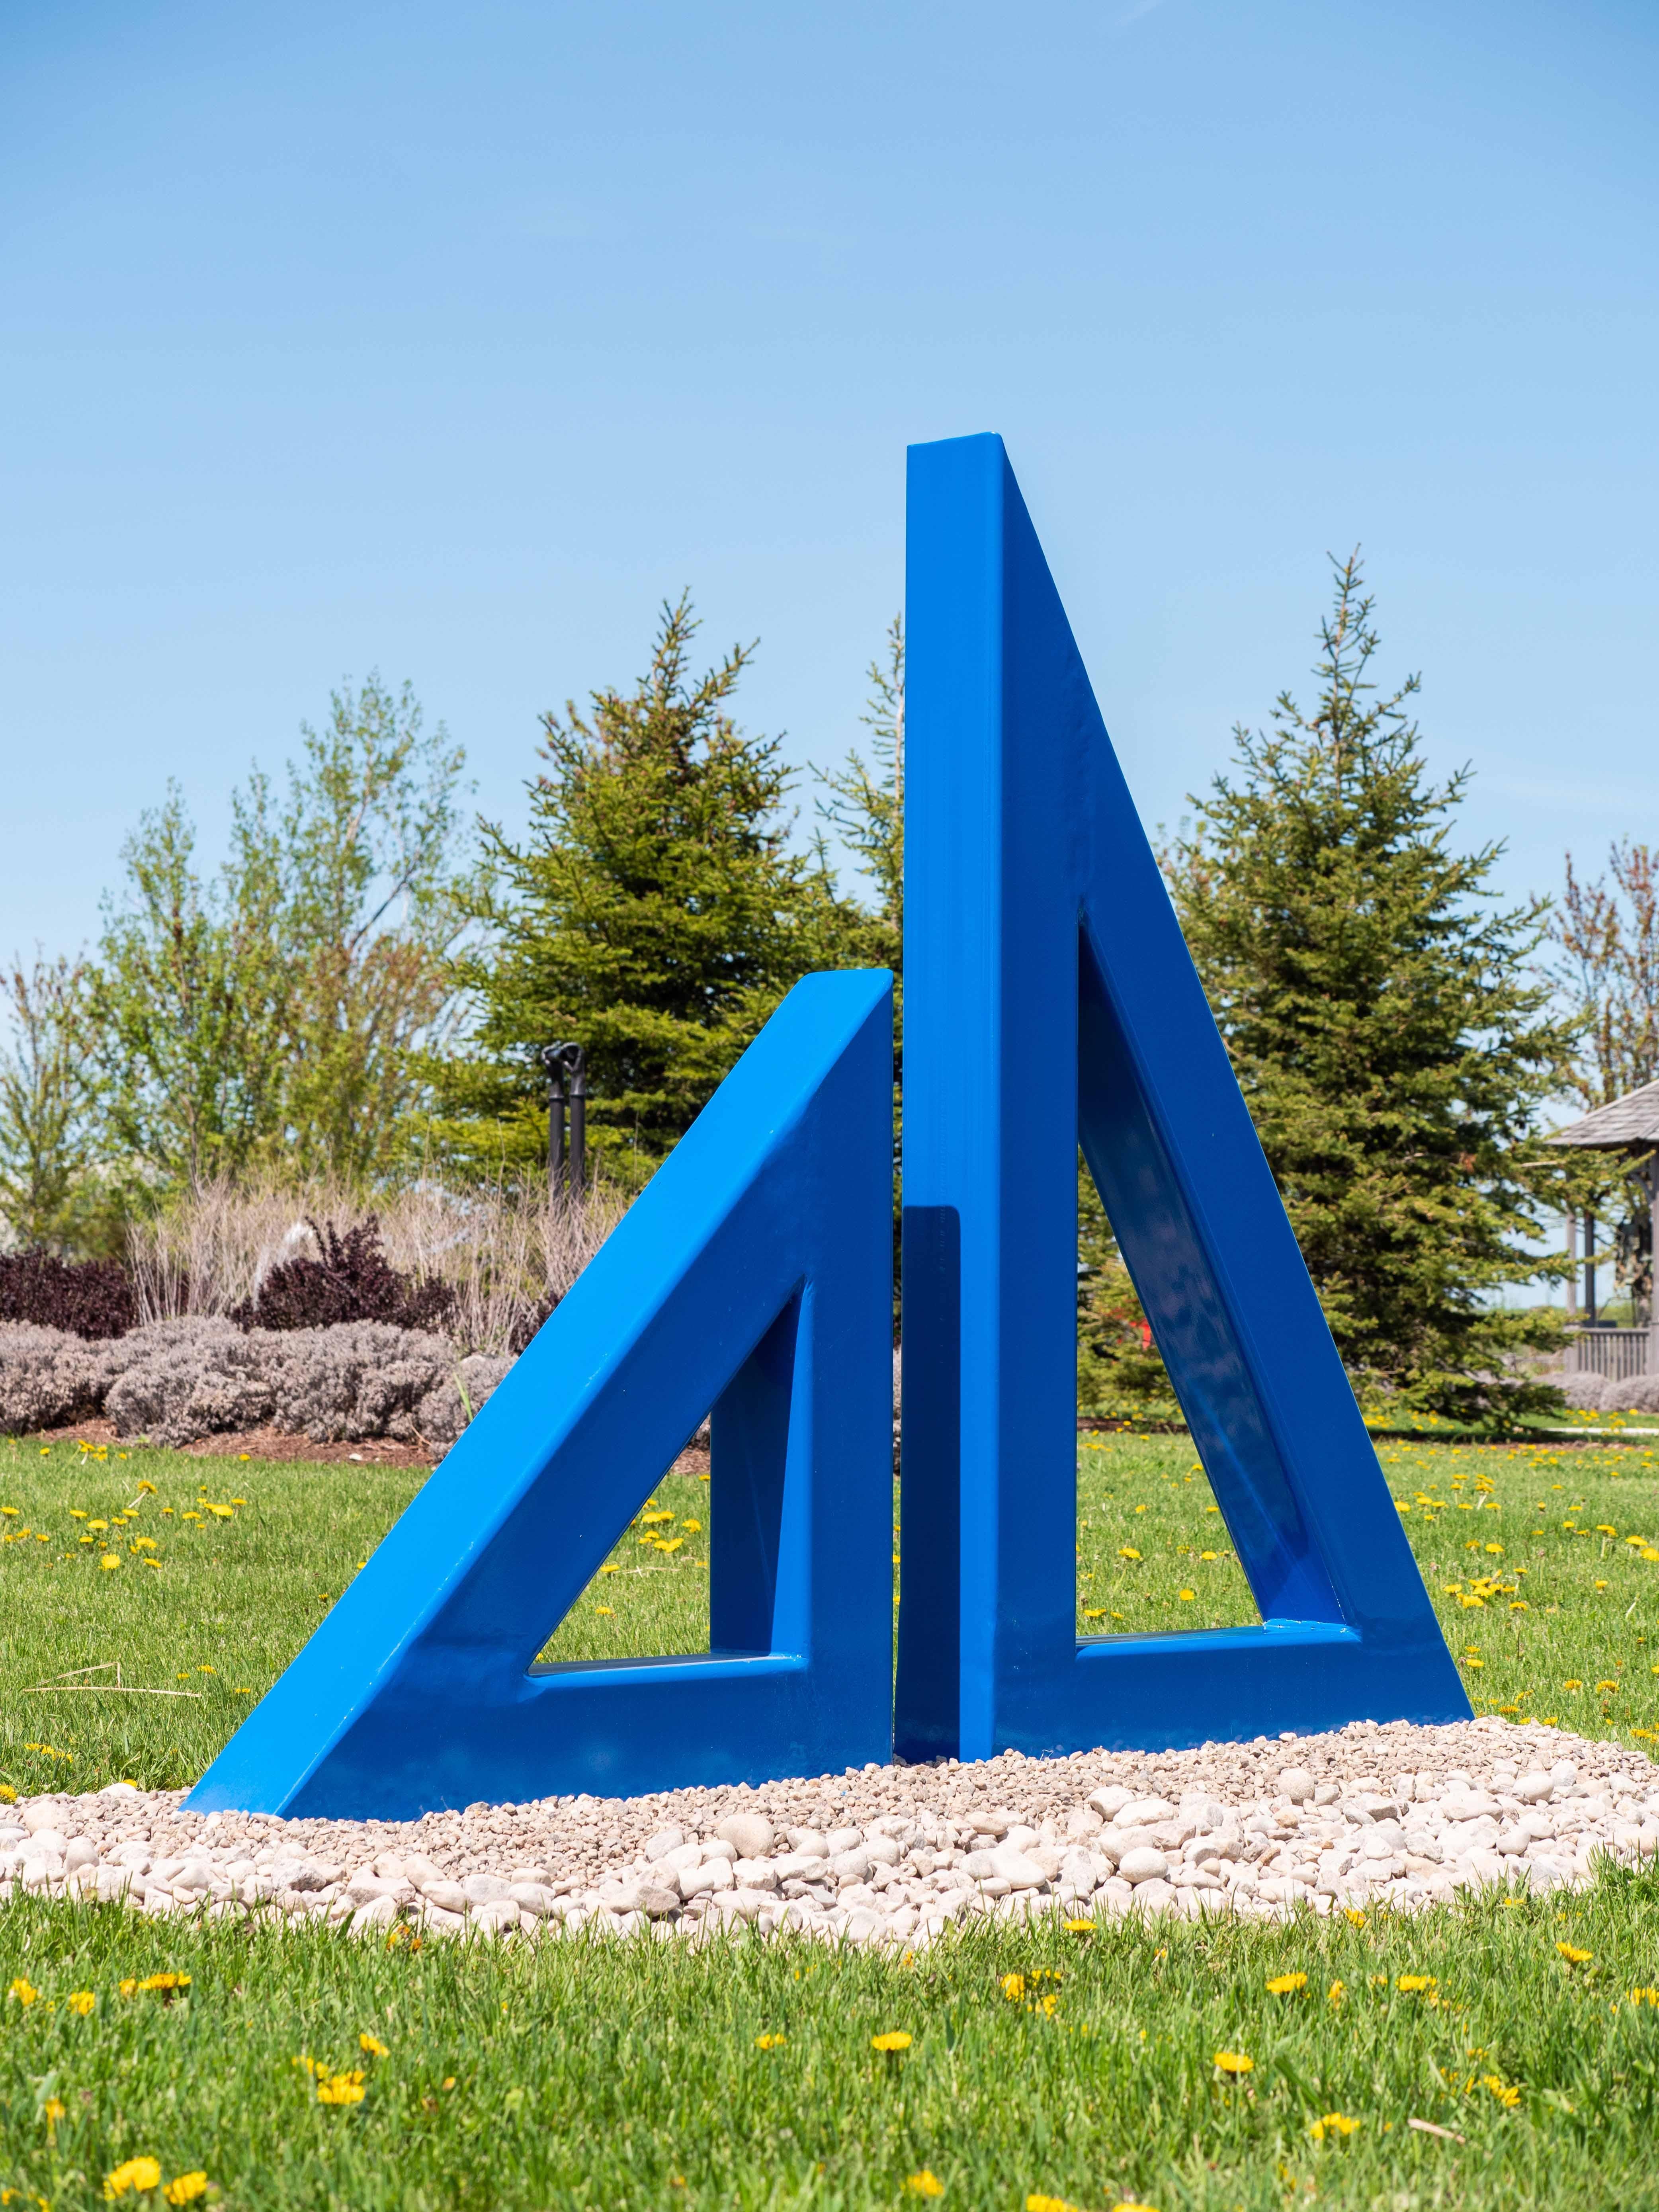 Two striking steel triangles painted in royal blue—in different sizes; their centers cut-out triangles stand beside one another in this new outdoor sculpture by Canadian artist Fraser Radford. Radford works in multiple disciplines including film,